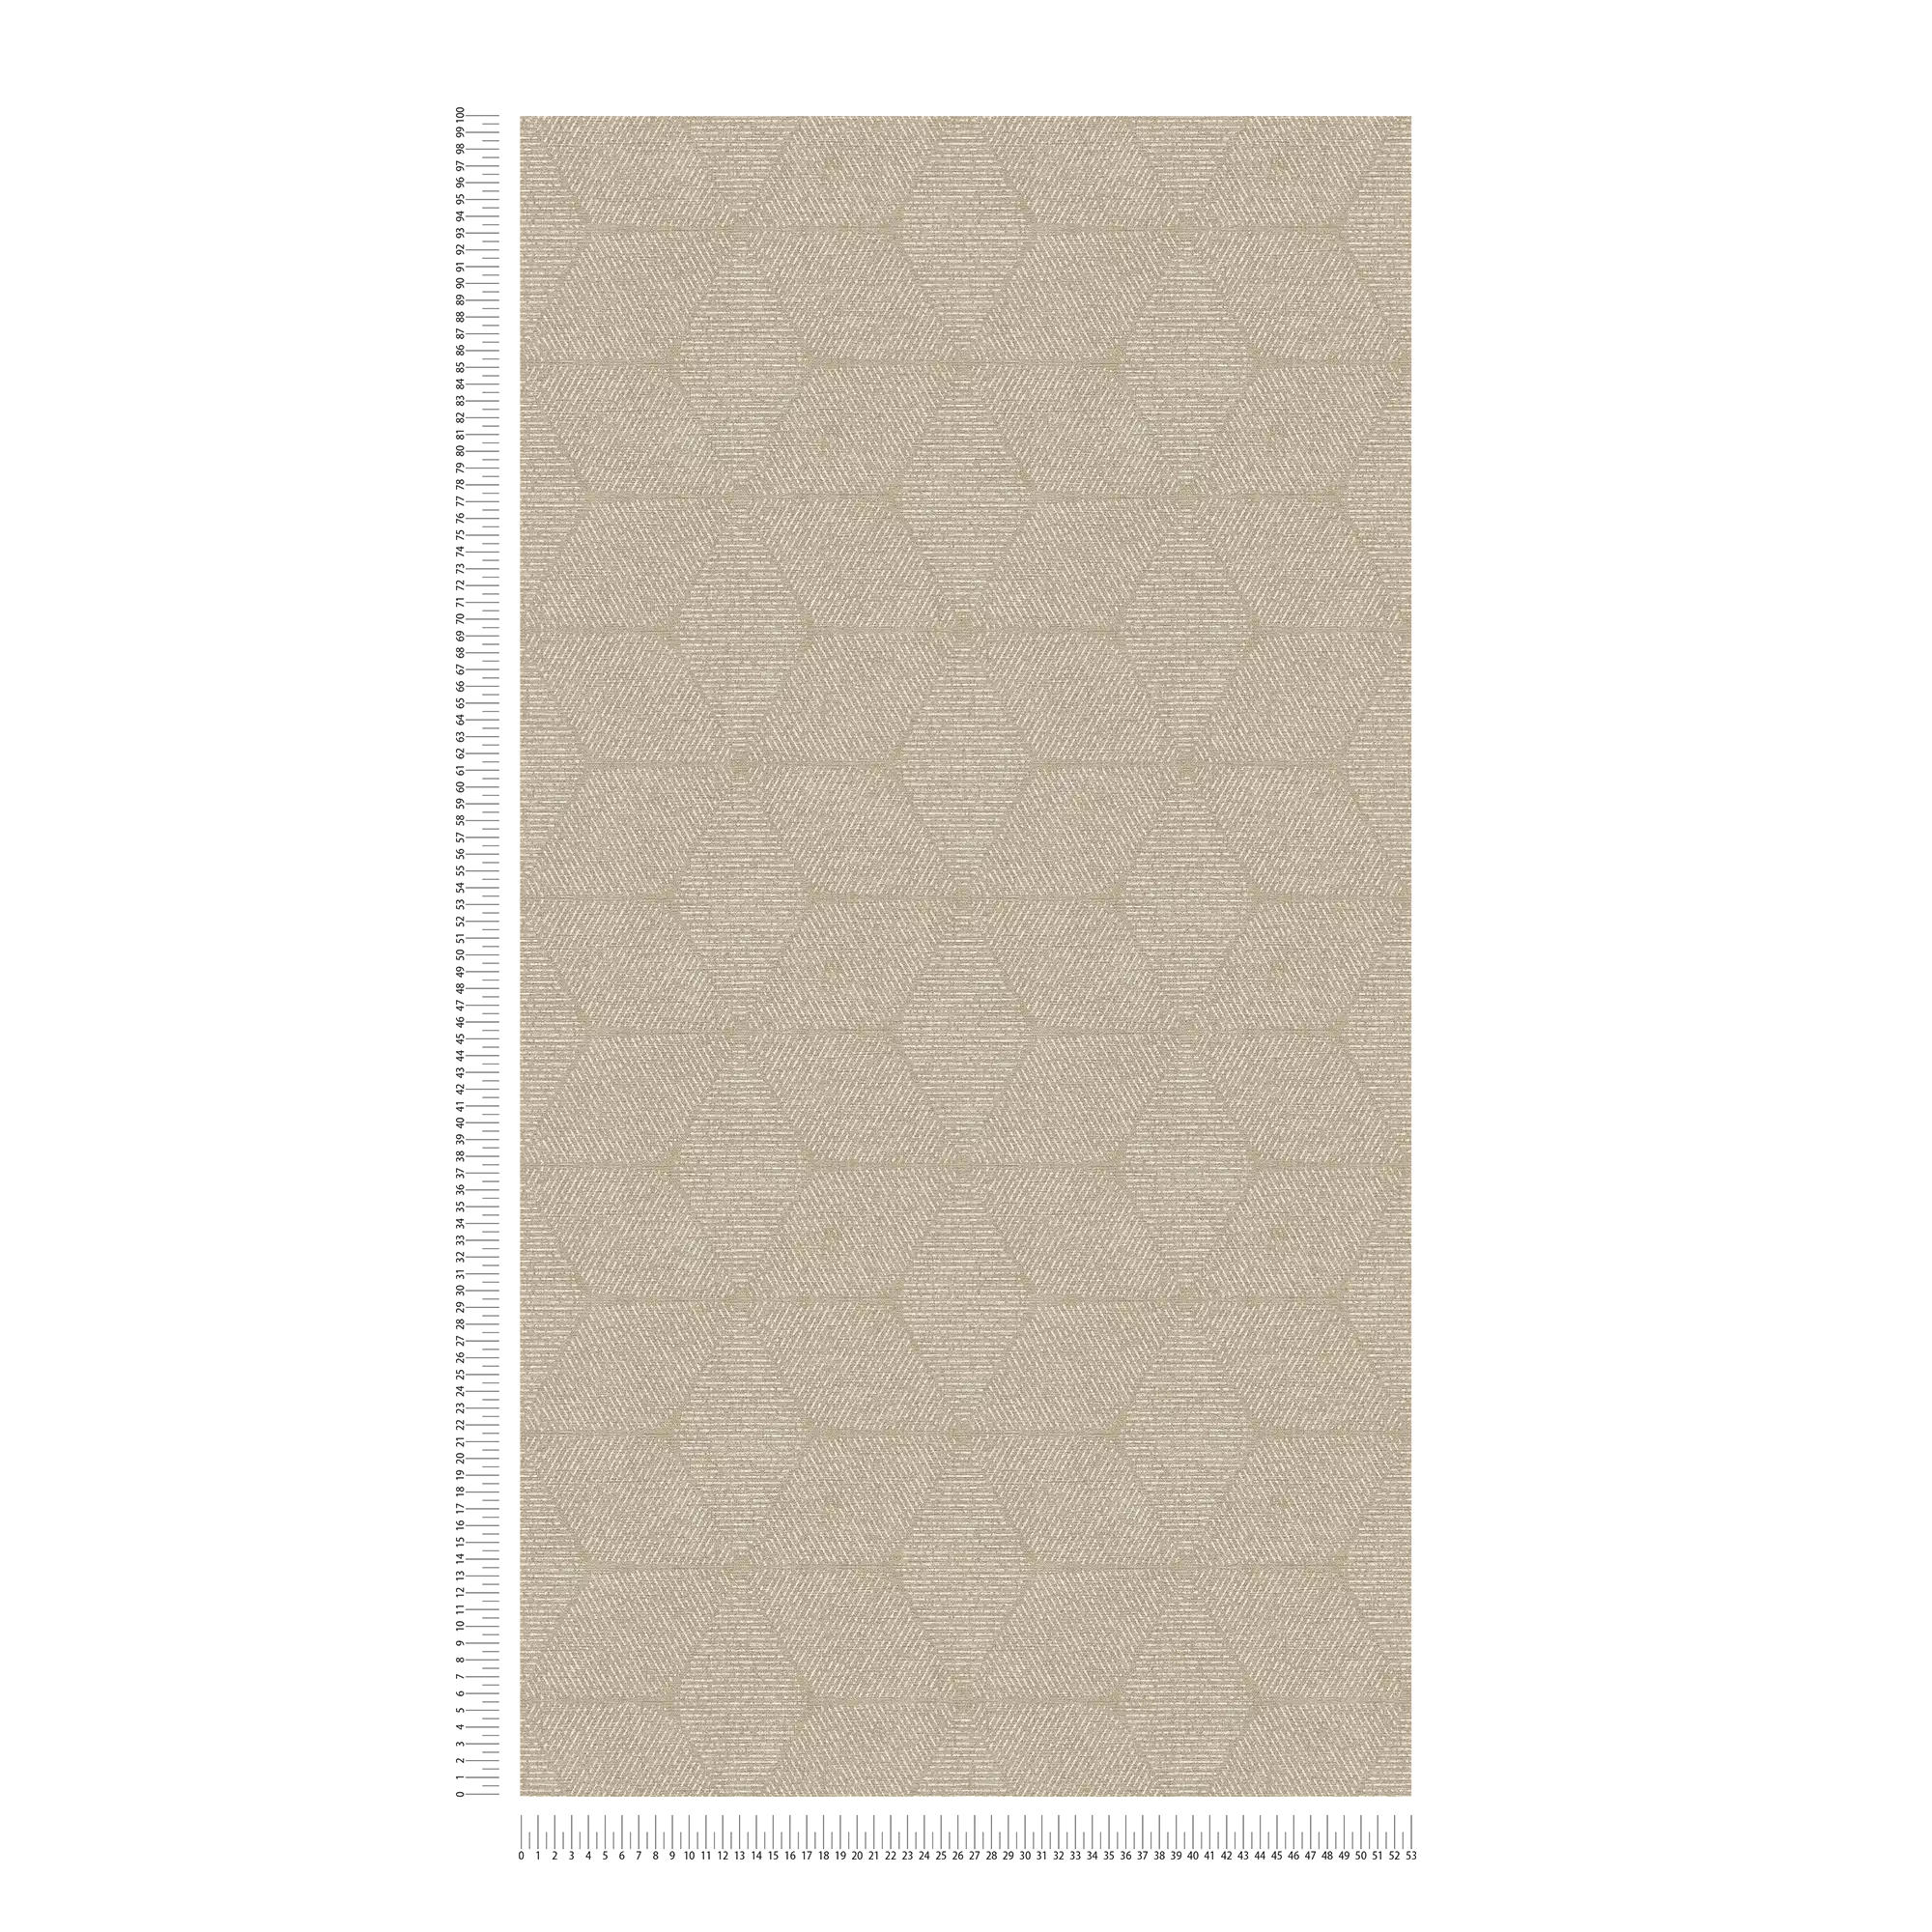             Non-woven wallpaper in natural style - beige, white
        